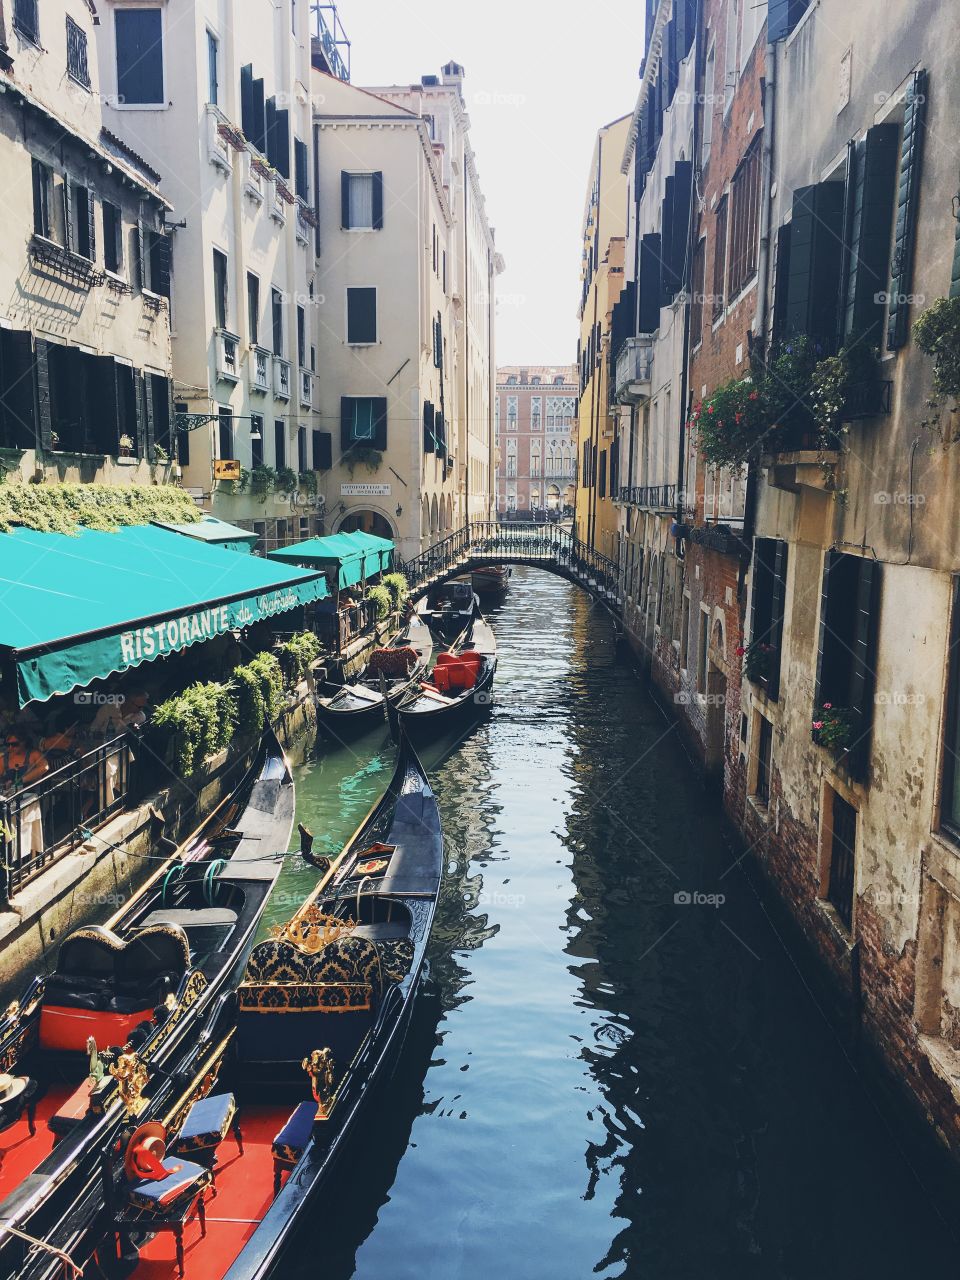 Exploring the canals of Venice, Italy.